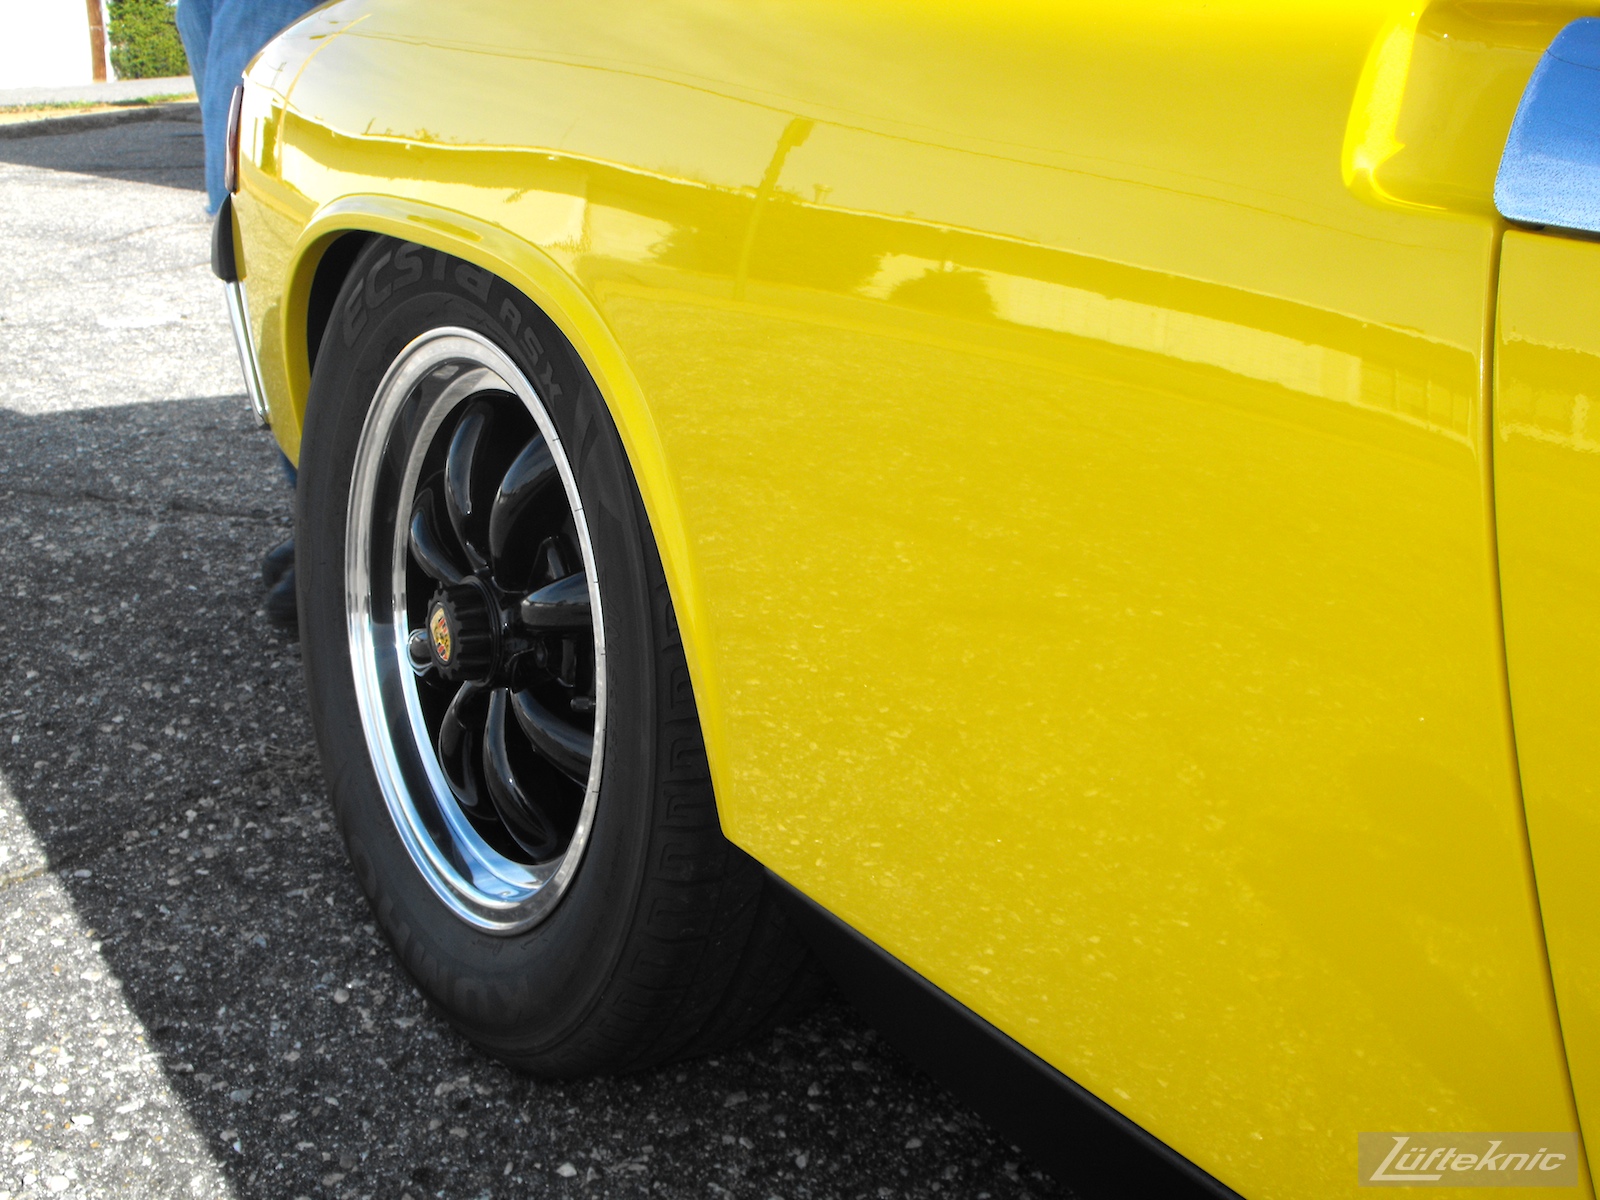 Rear quarter panel details of A completely restored yellow Porsche 914 posing in the parking lot of Lufteknic.